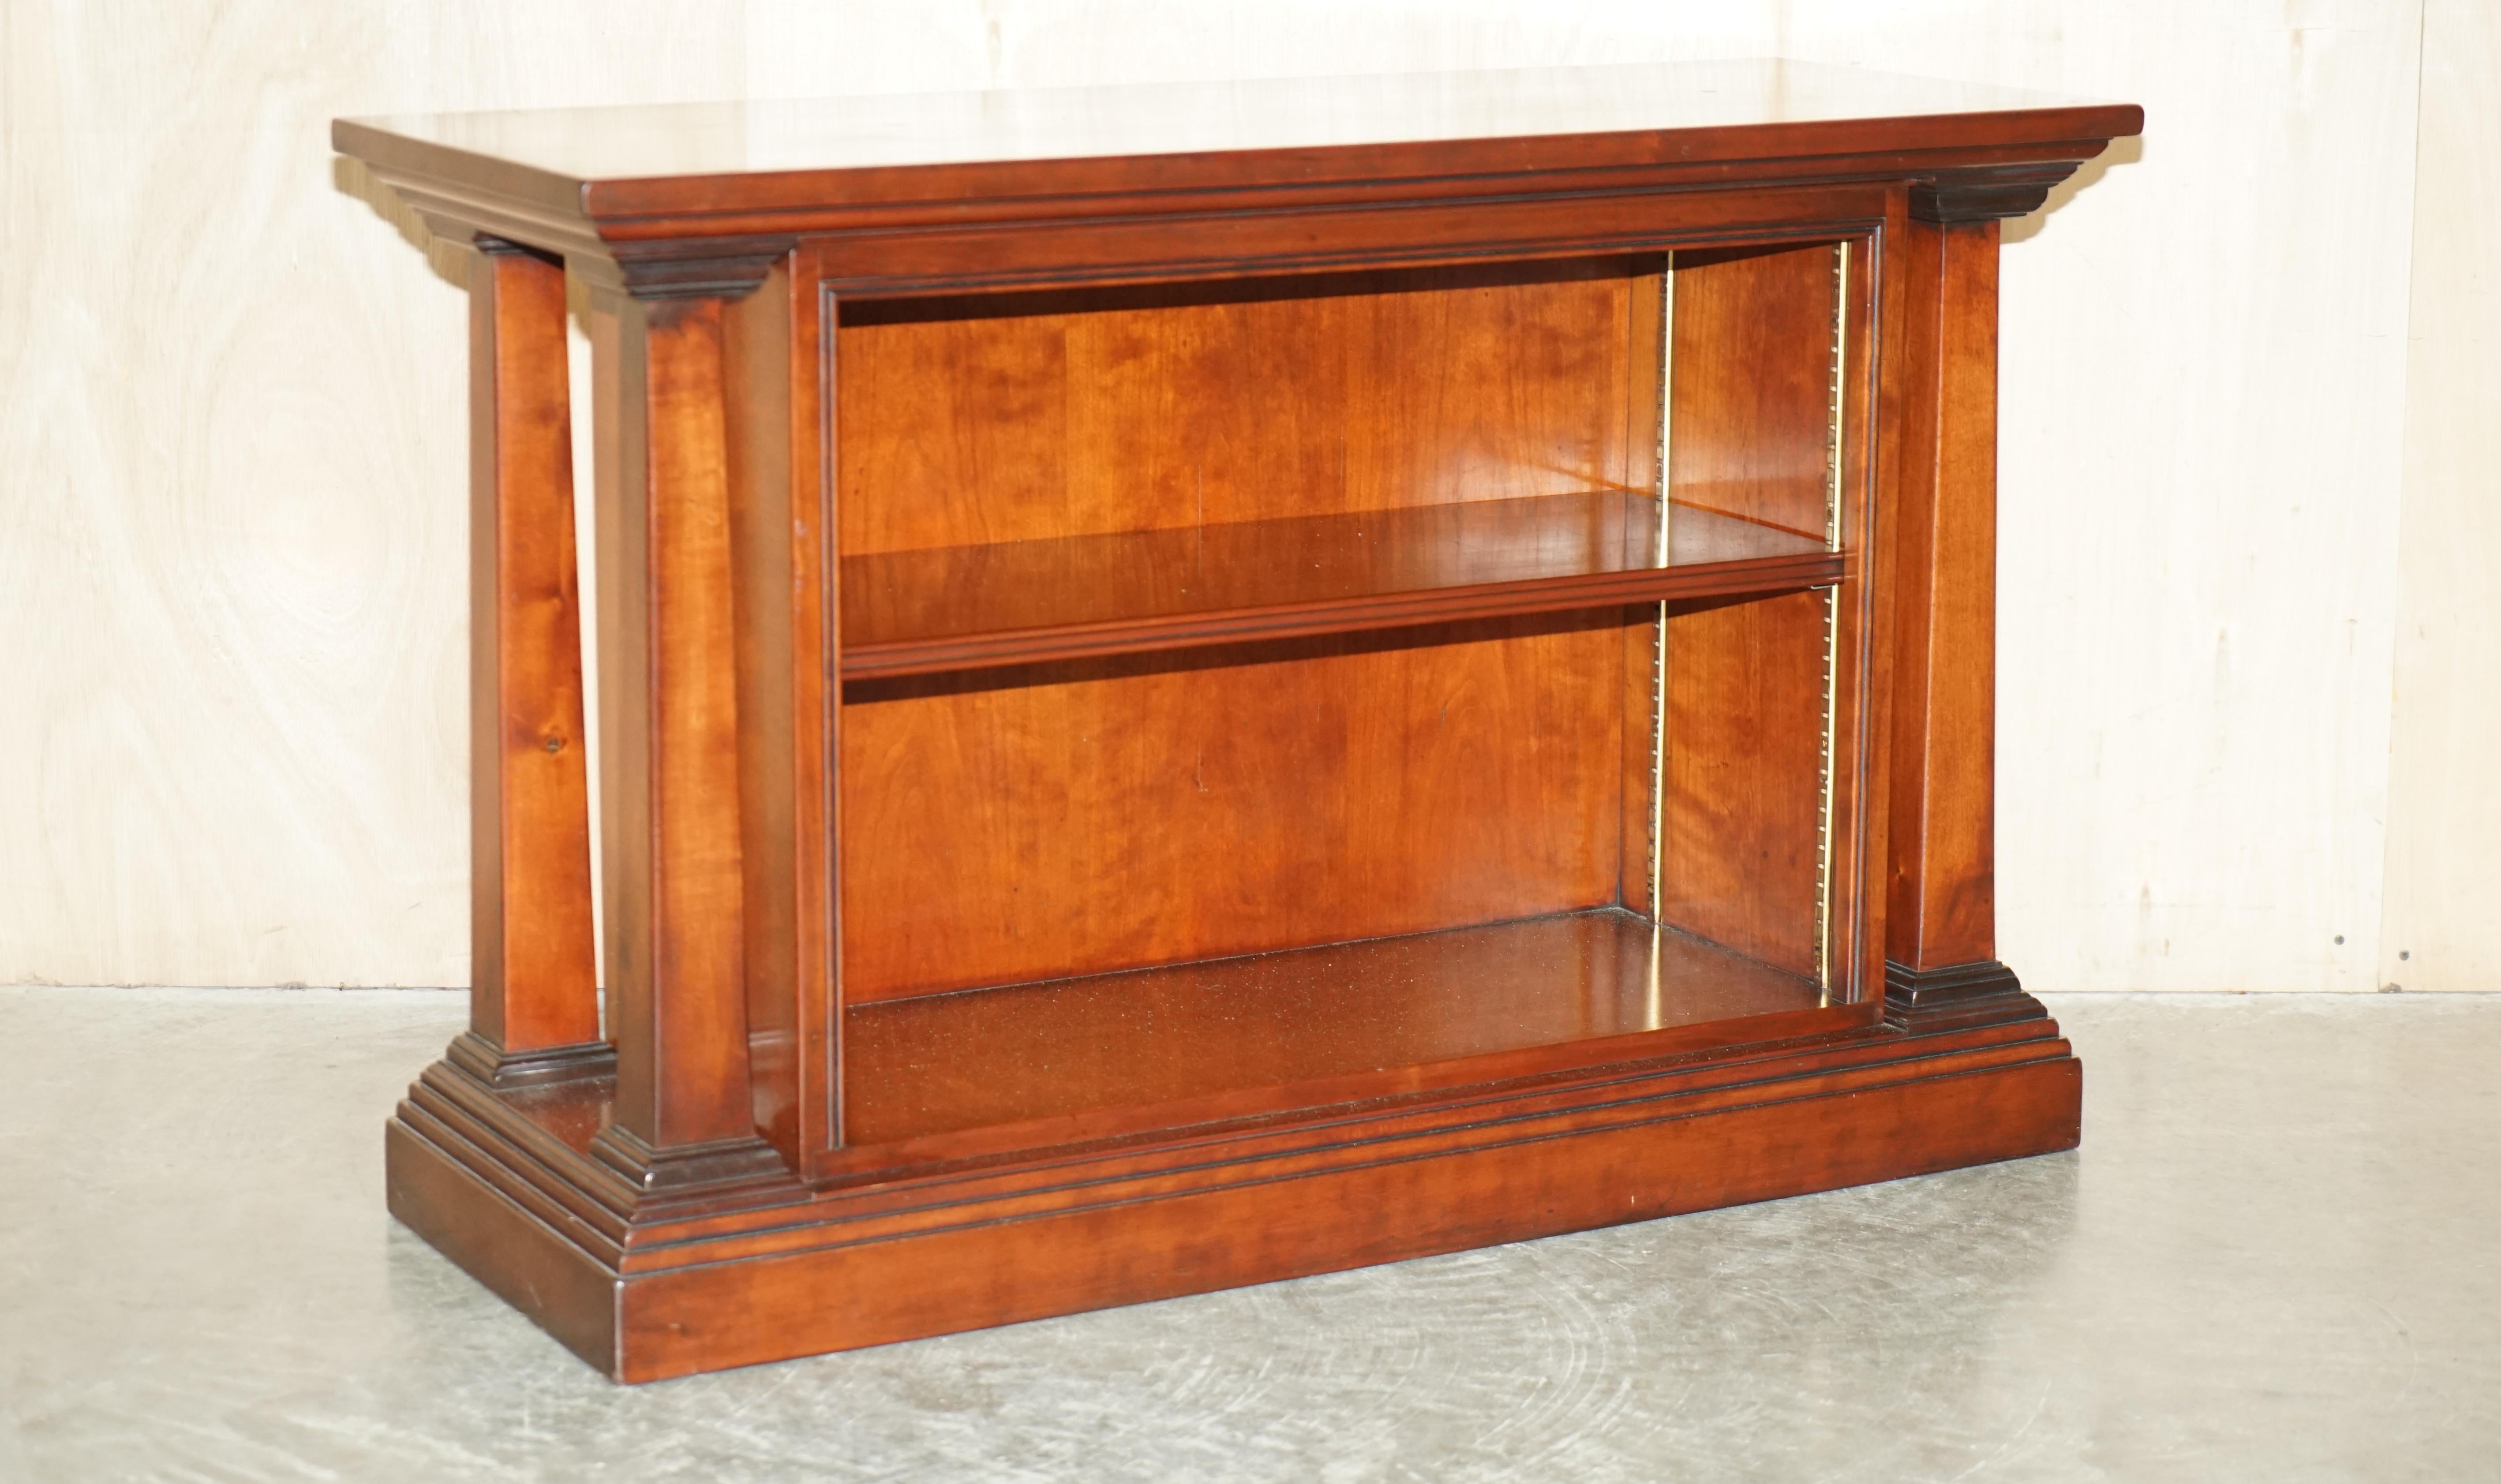 Victorian Reh Kennedy Harrods London Solid Hardwood Open Pillared Dwarf Library Bookcase For Sale